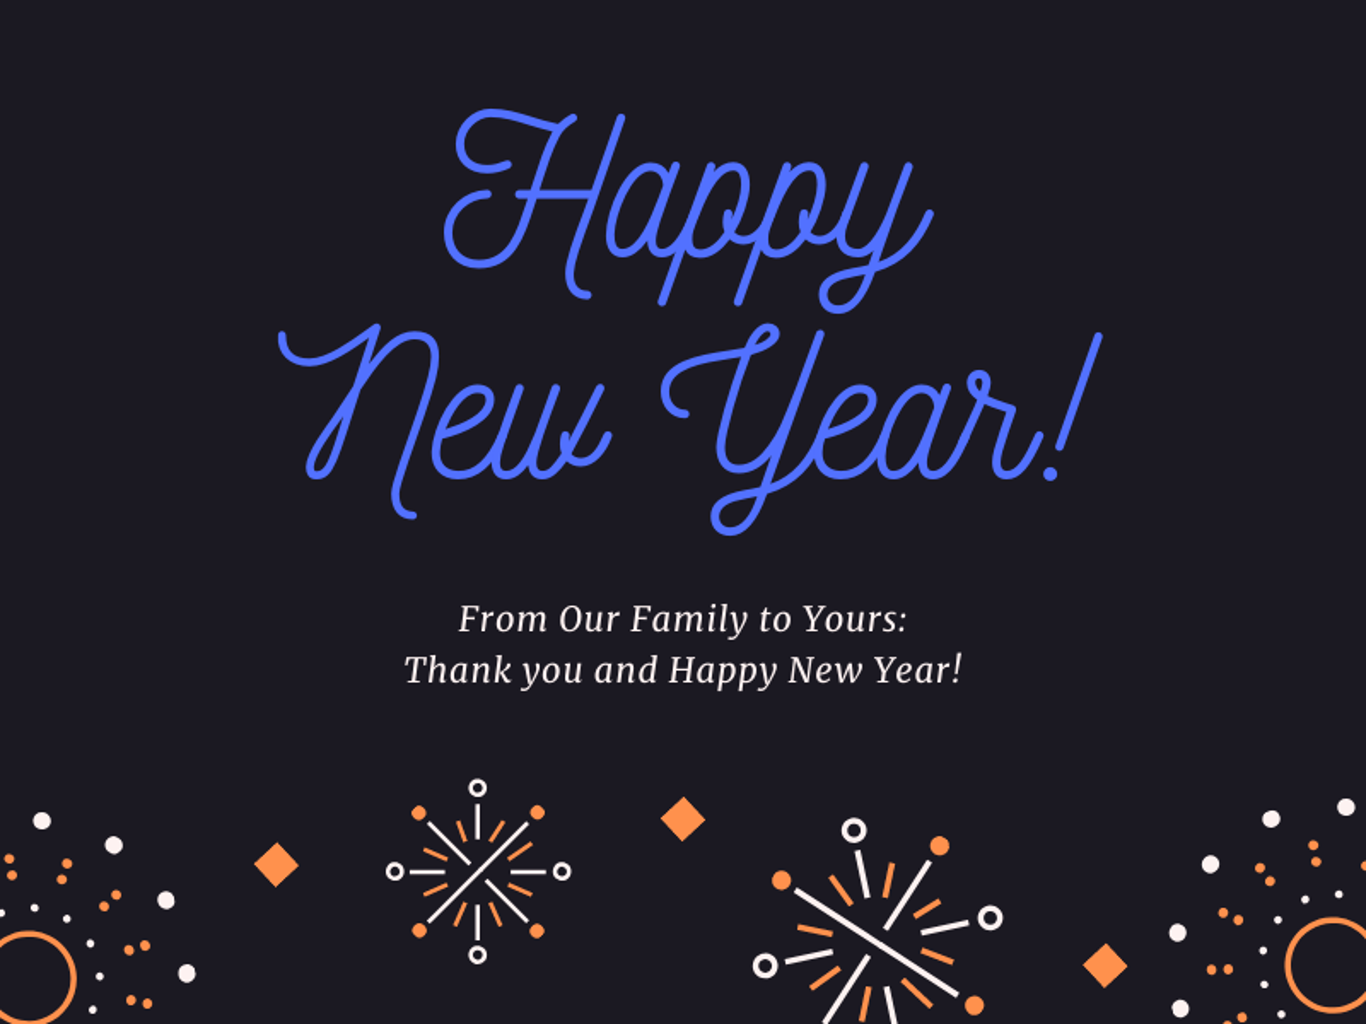 From Our Family to Yours: Thank you and Happy New Year!